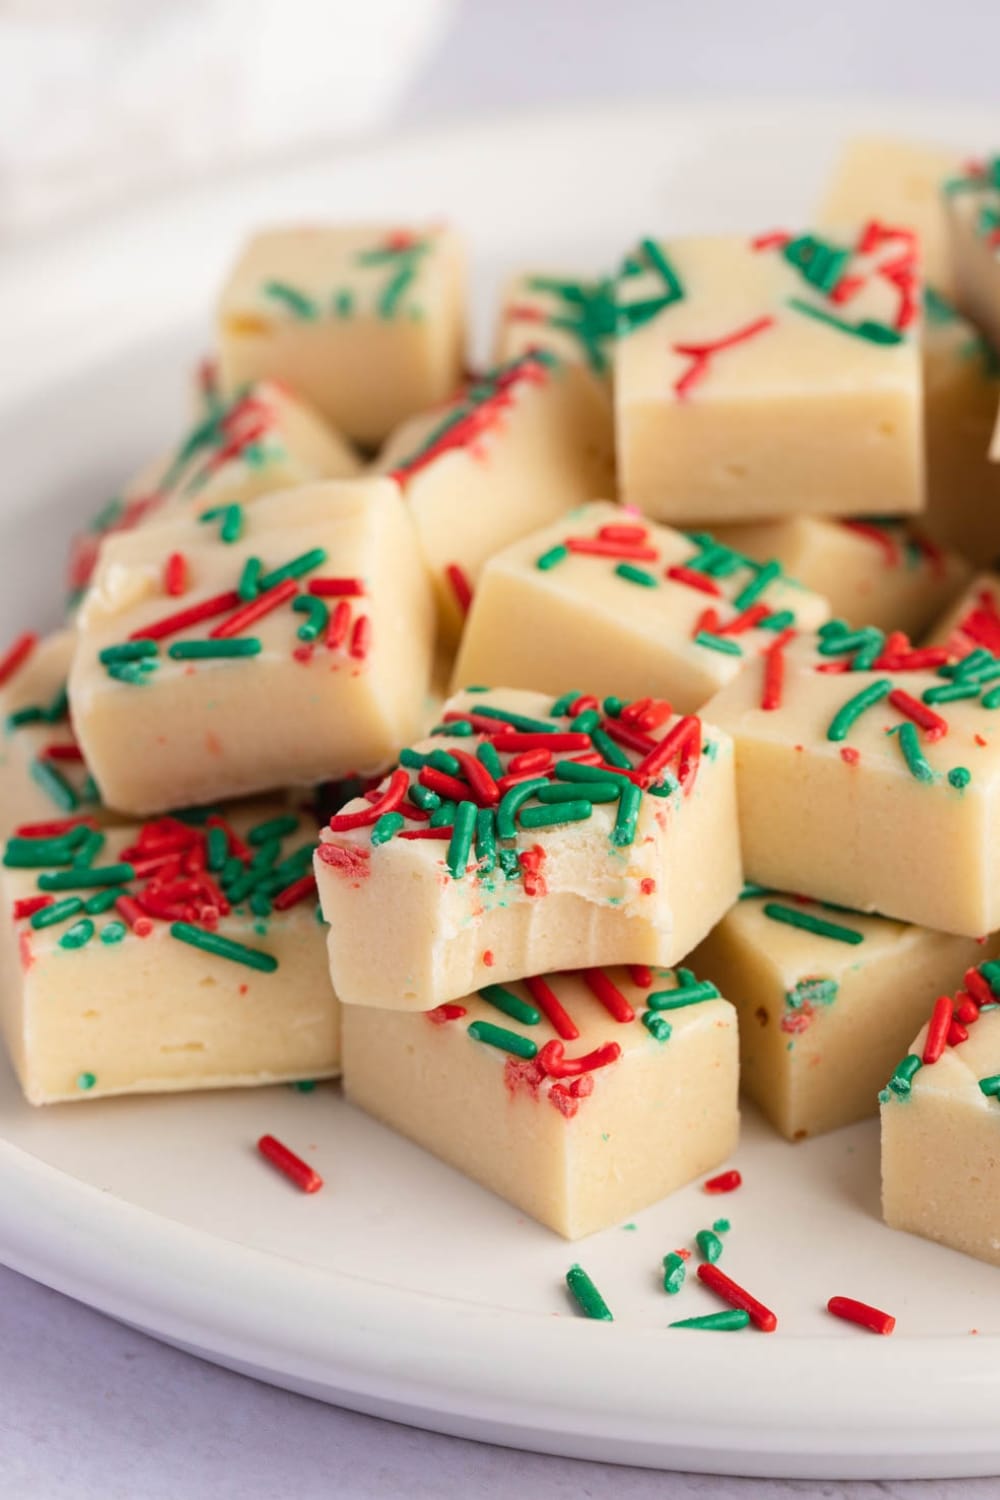 Sweet Homemade Christmas Cookie Fudge with Sprinkled Candies